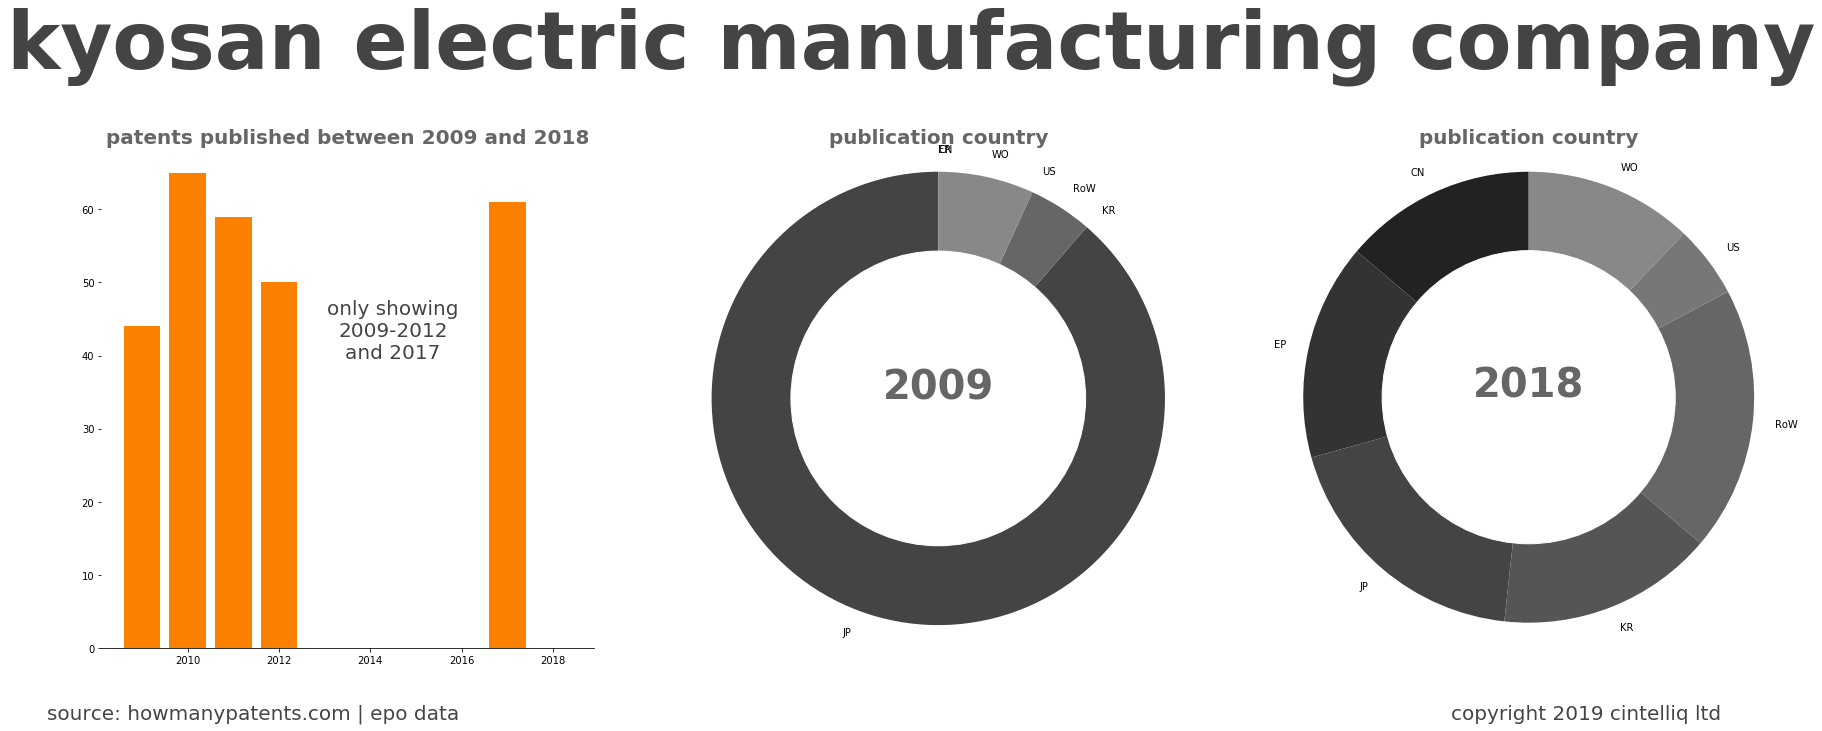 summary of patents for Kyosan Electric Manufacturing Company